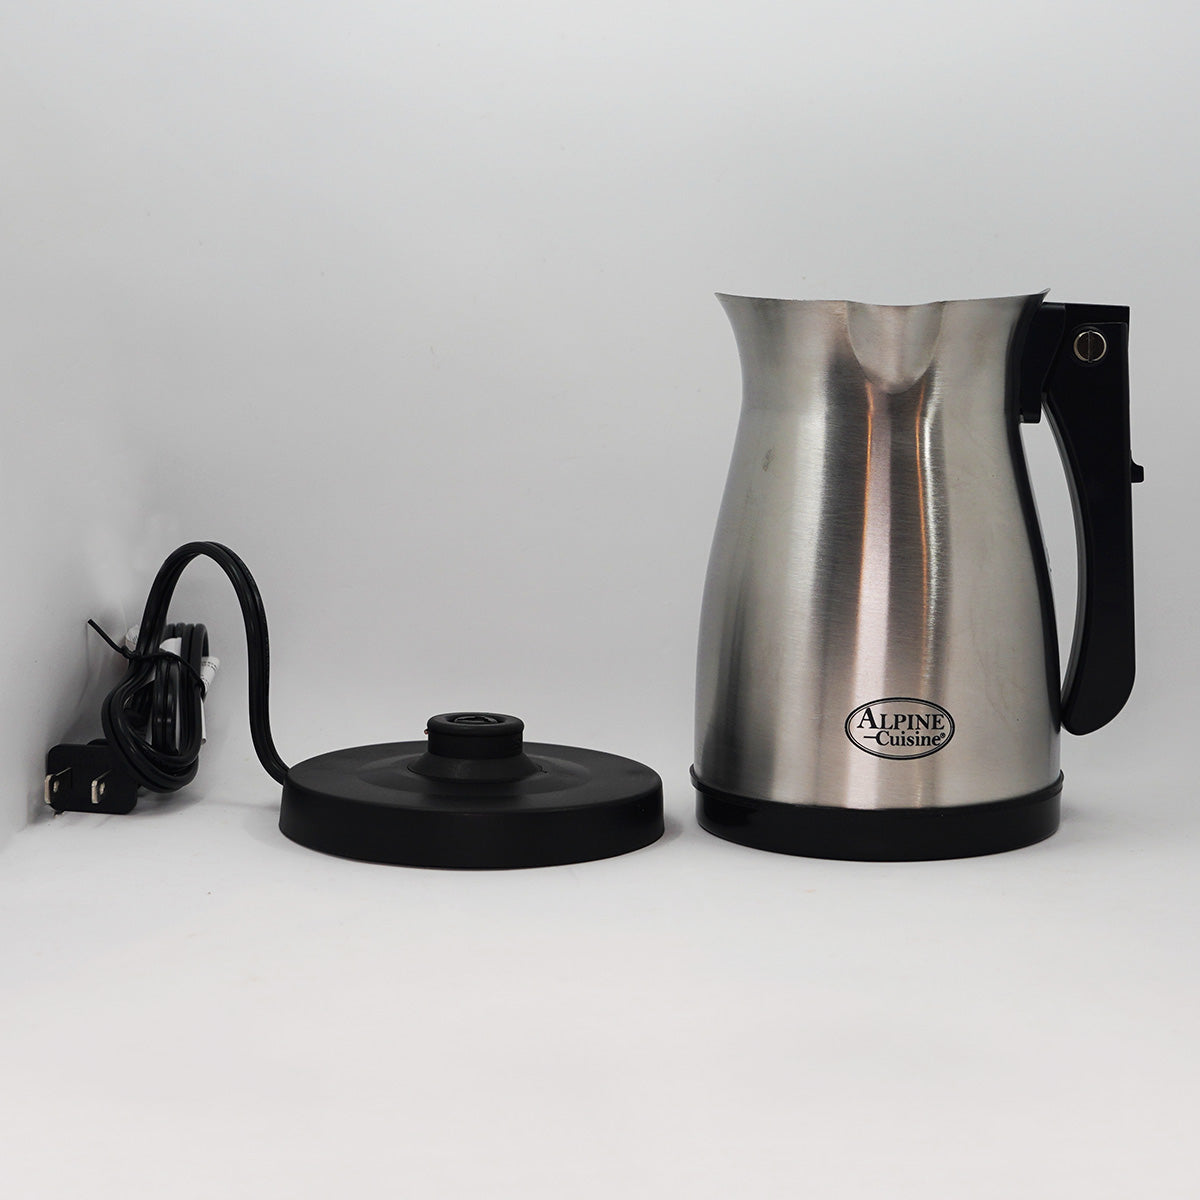 small electric coffee maker